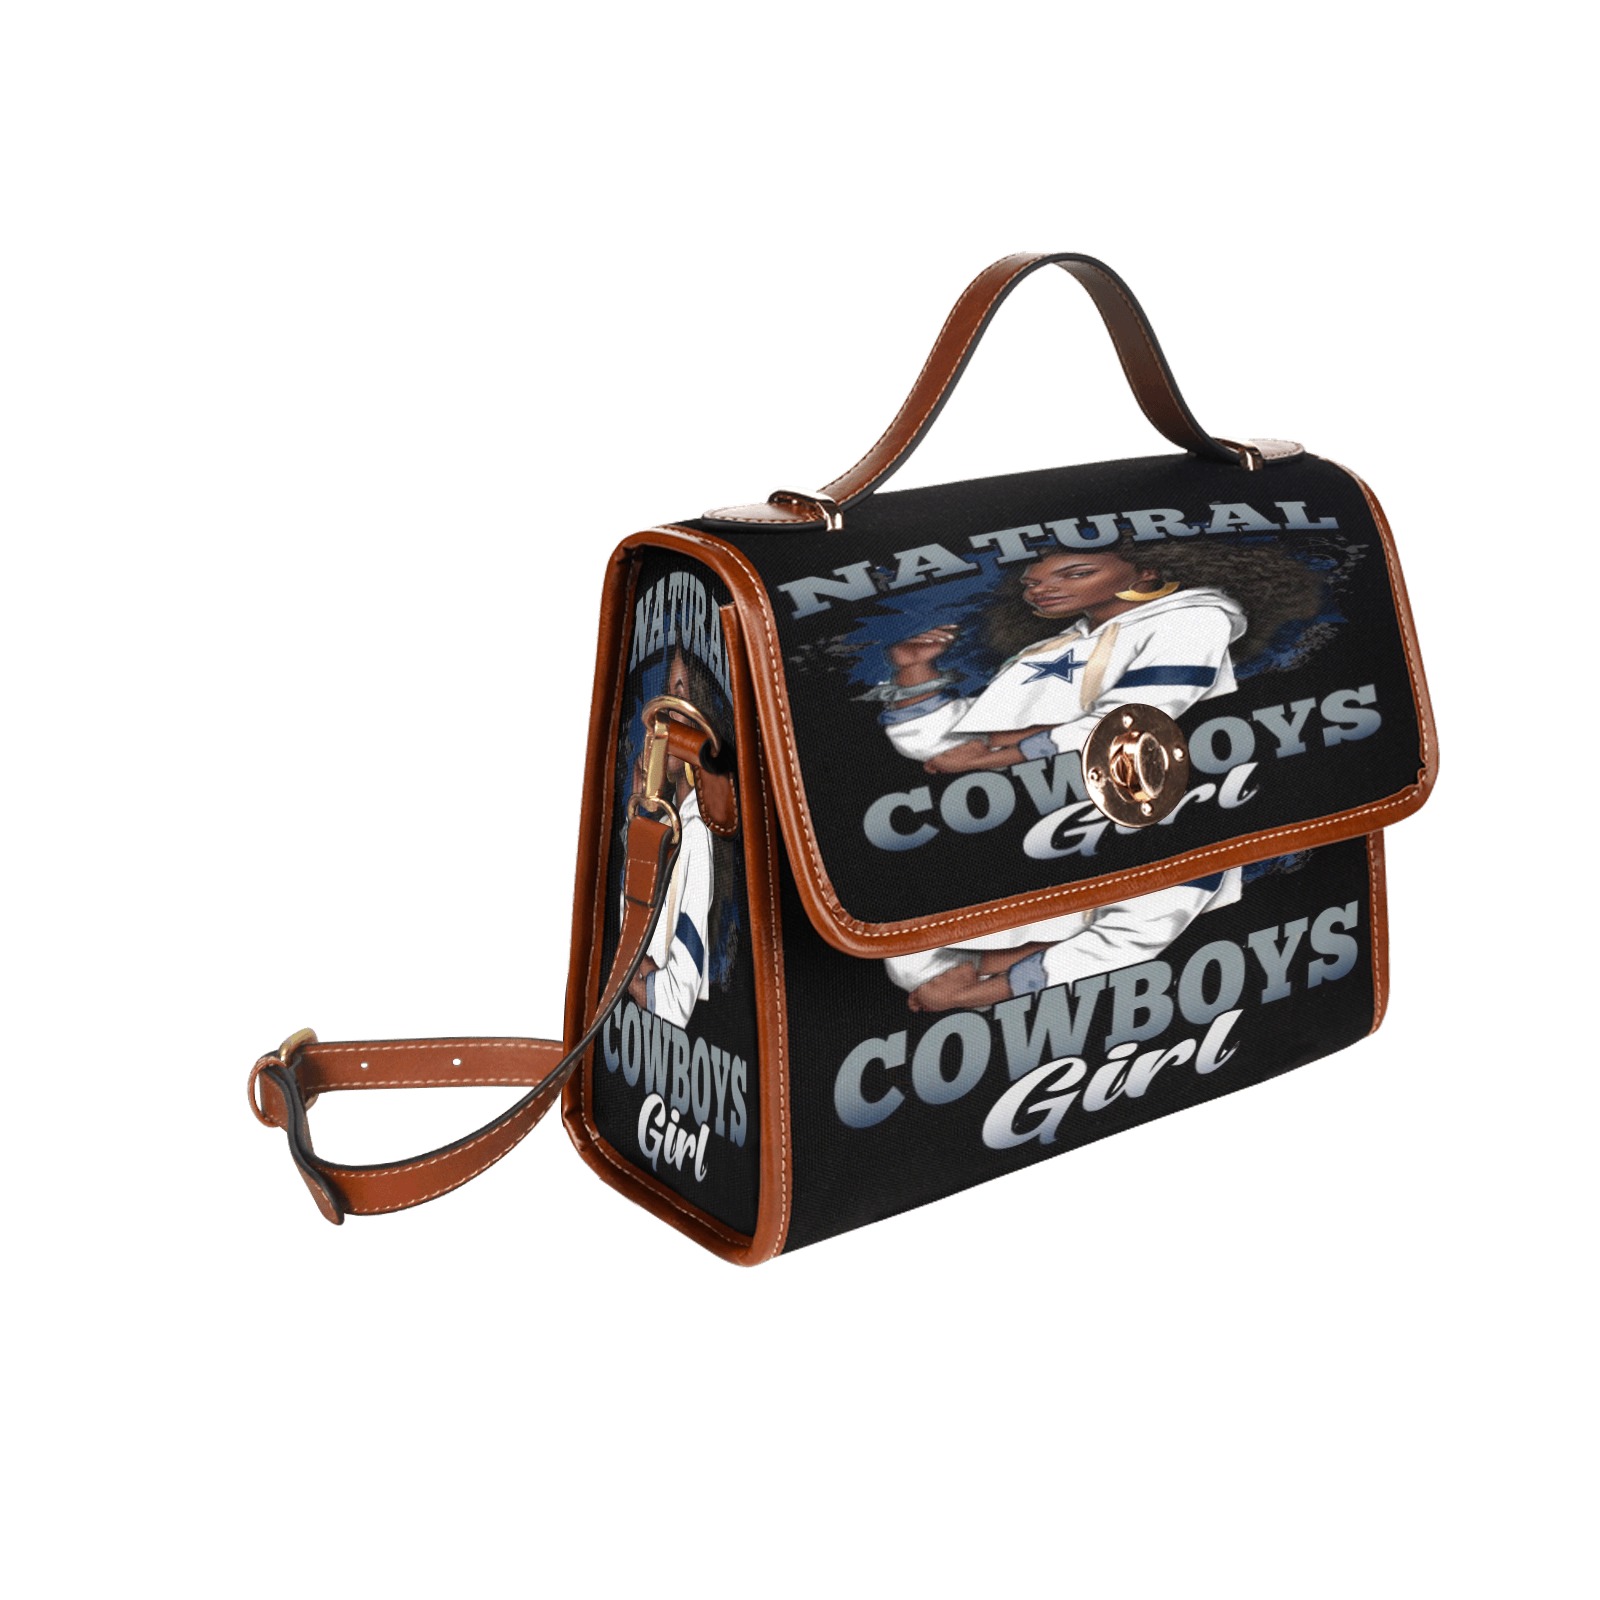 NEWCOWBOYSGIRL-removebg-preview Waterproof Canvas Bag-Brown (All Over Print) (Model 1641)